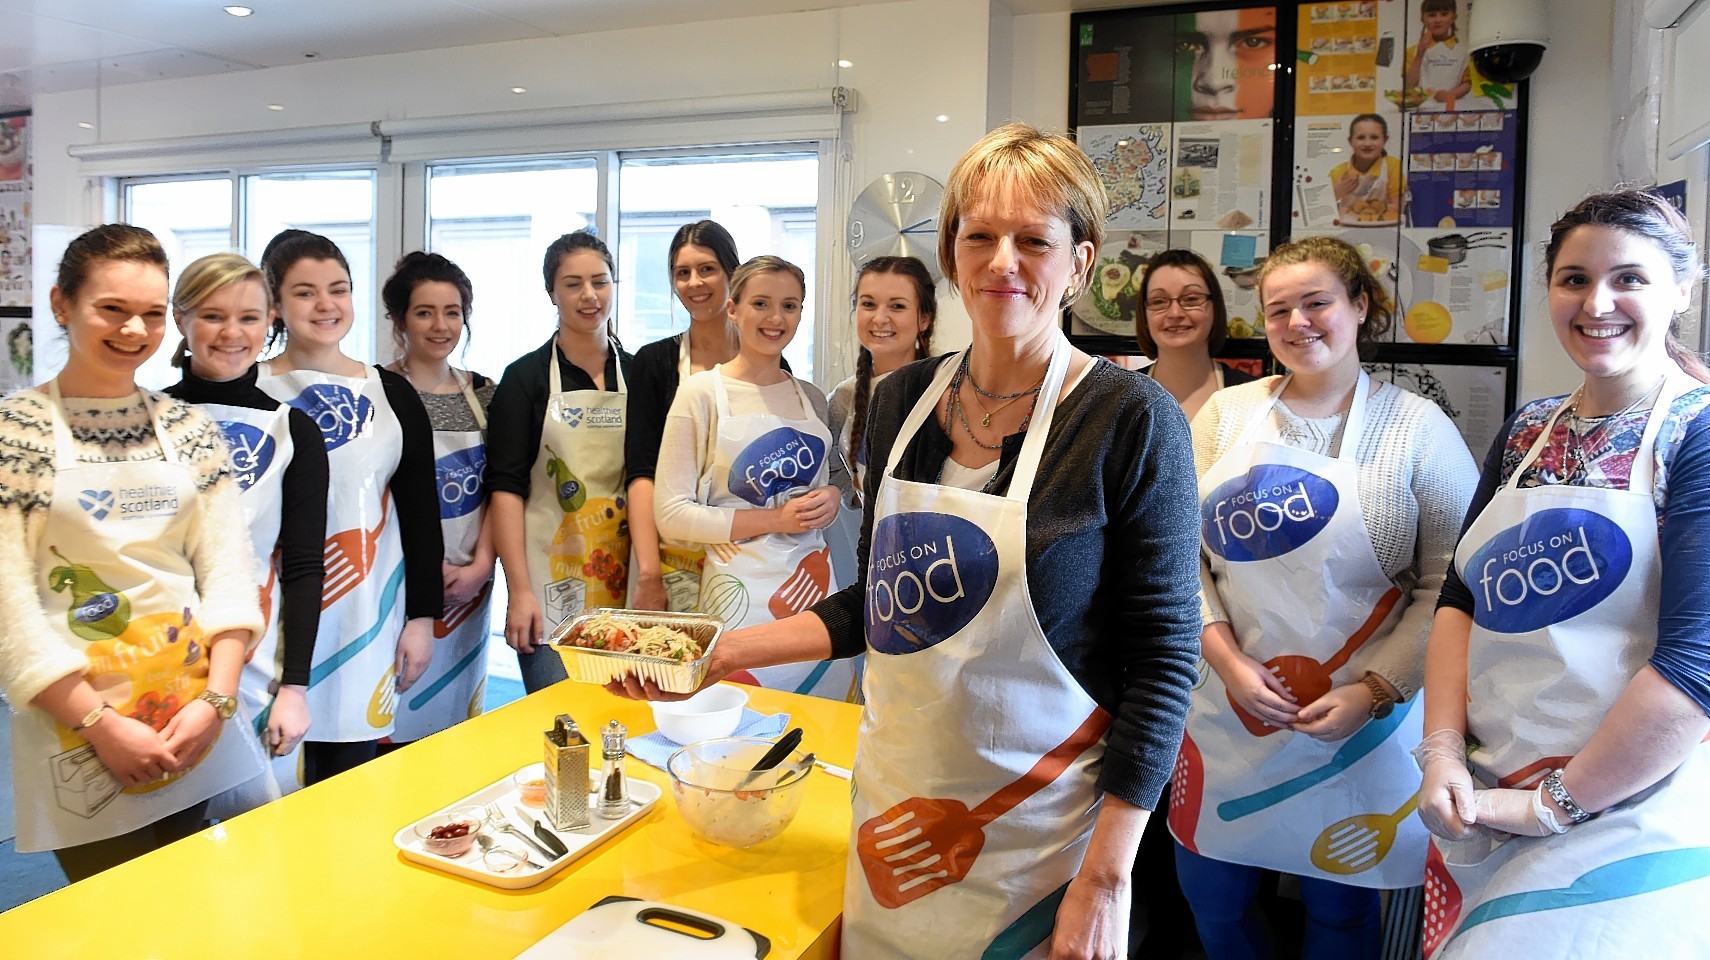 The Healthier Scotland cooking bus at Aberdeen University